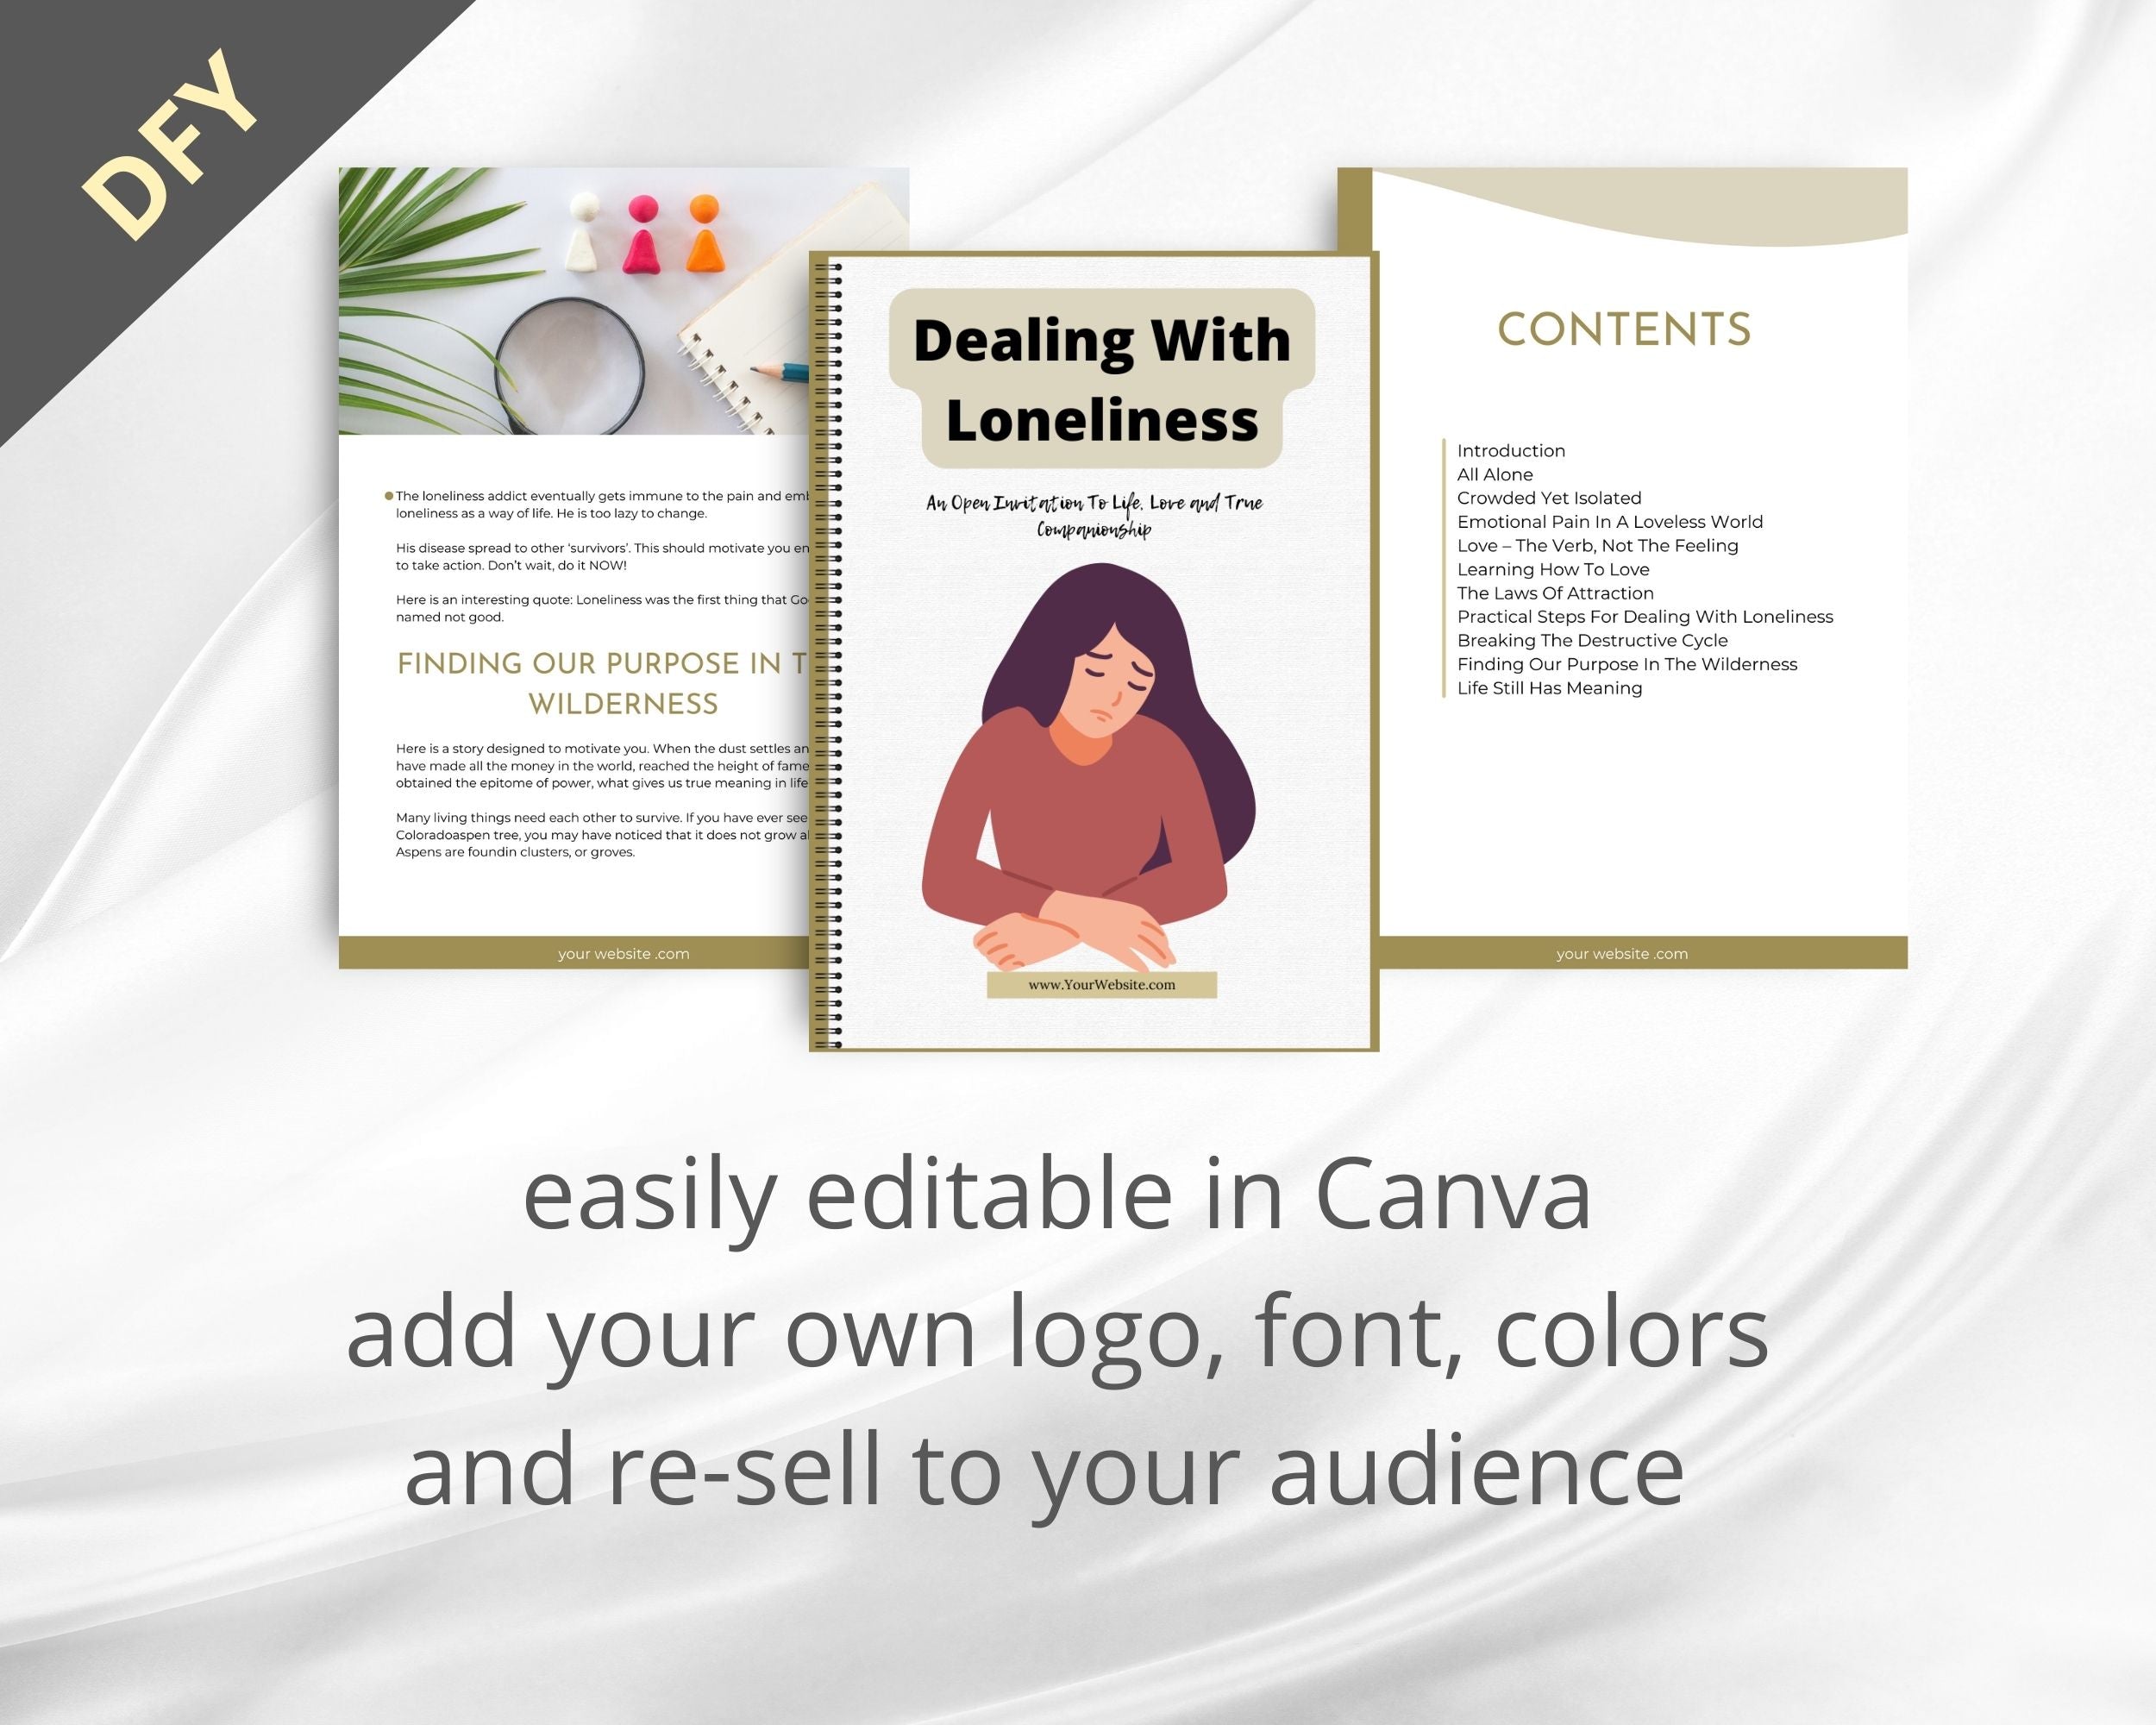 Editable Dealing With Loneliness Mini Ebook | Done-for-You Ebook in Canva | Rebrandable and Resizable Canva Template